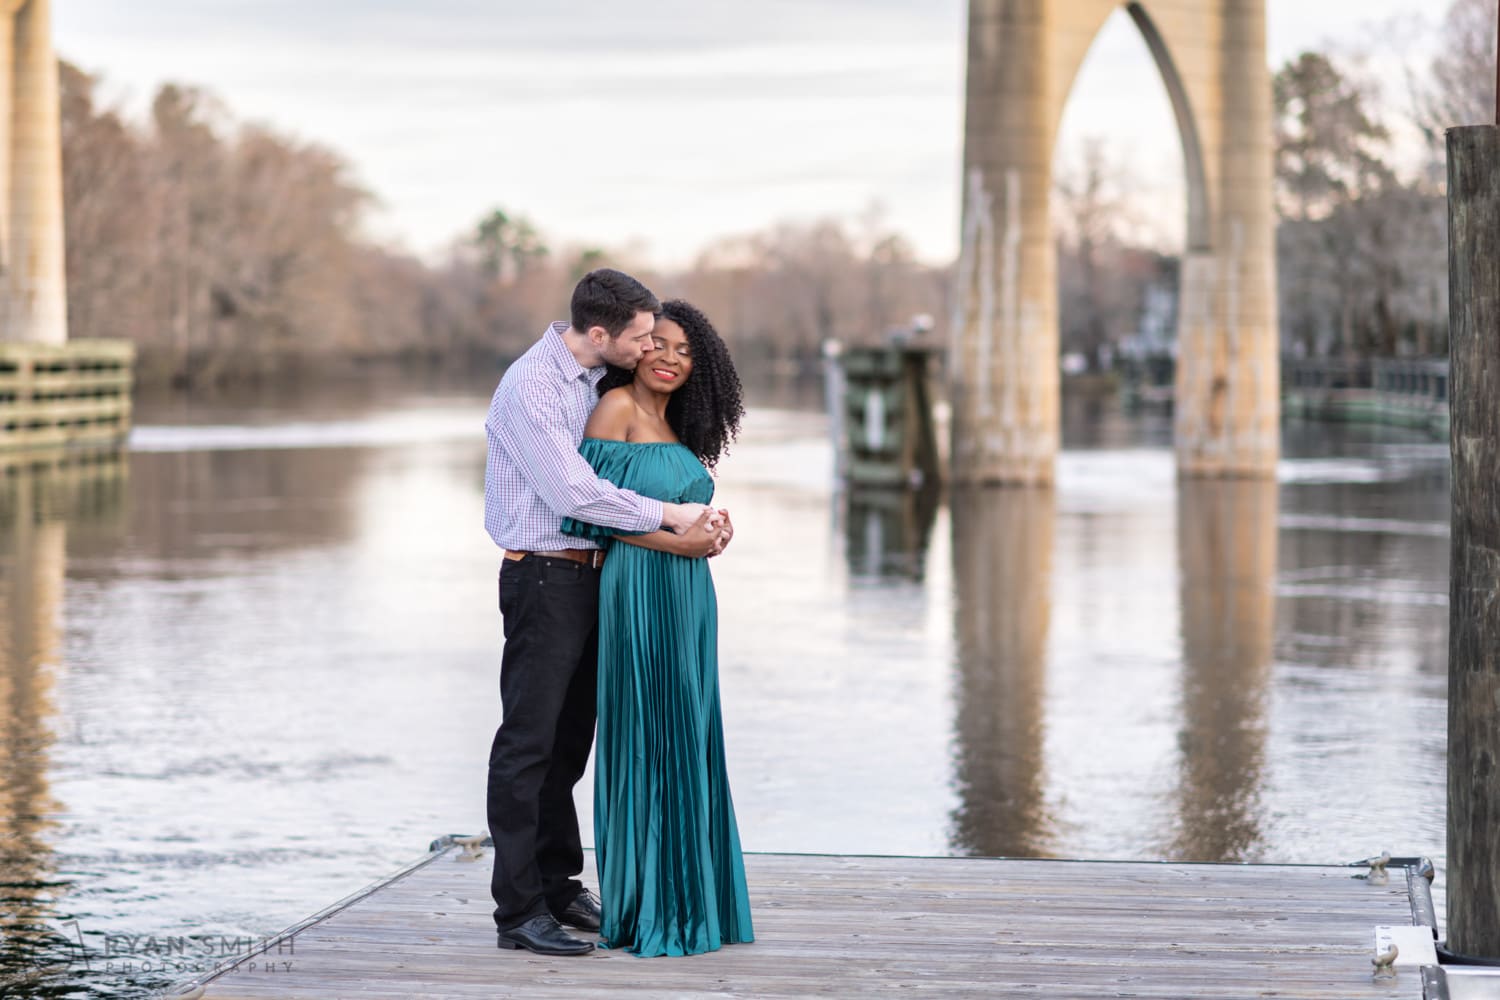 Kiss on the cheek on the Waccamaw River - Conway Riverwalk